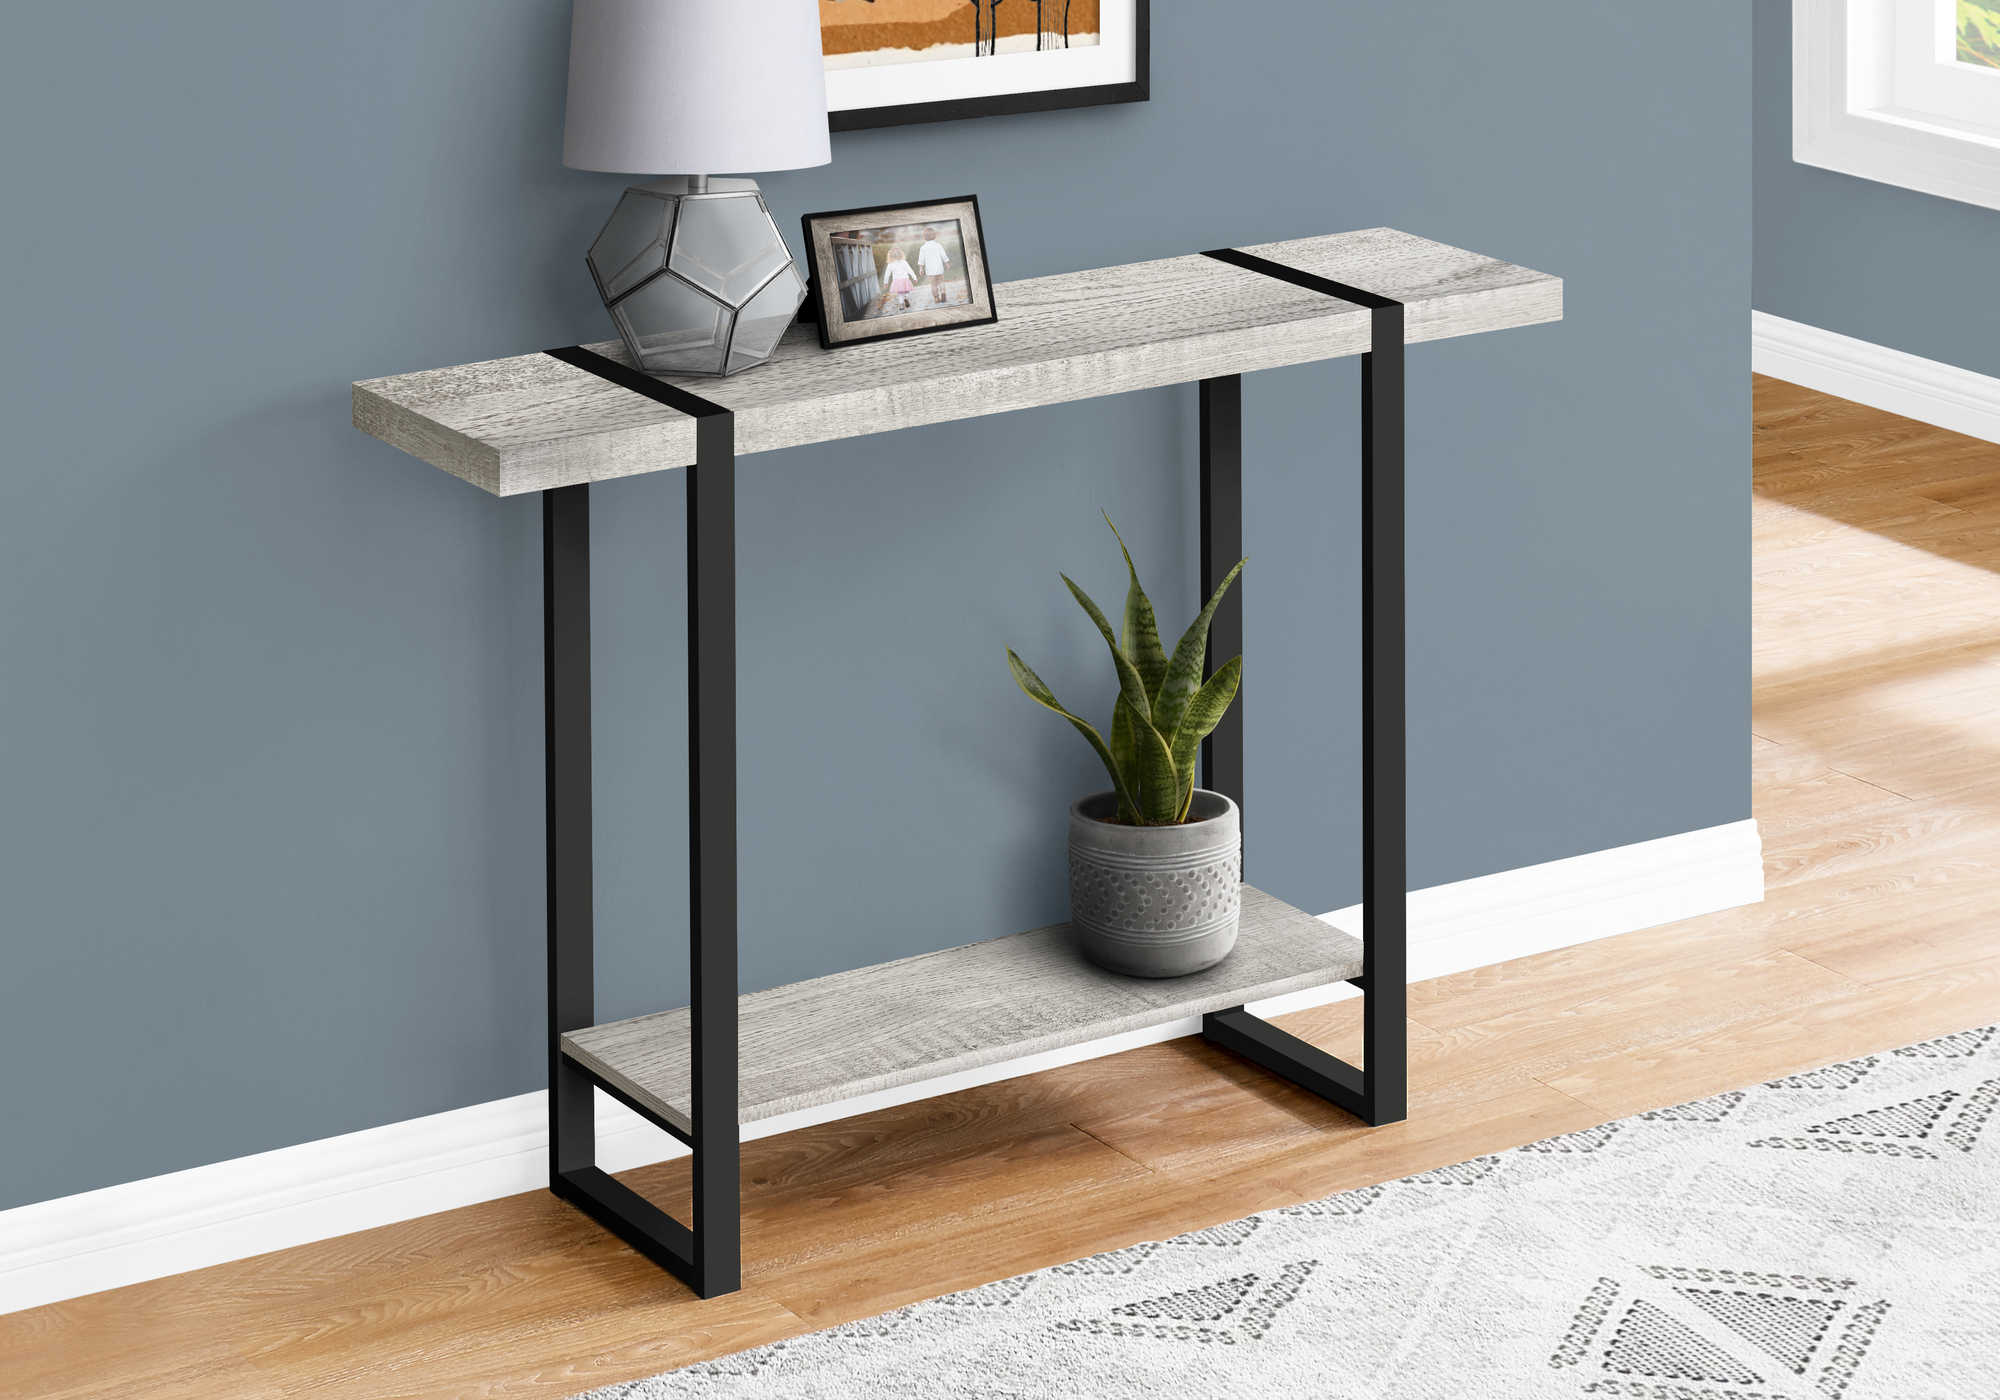 ACCENT TABLE - 48"L / GREY RECLAIMED WOOD-LOOK / BLACK 